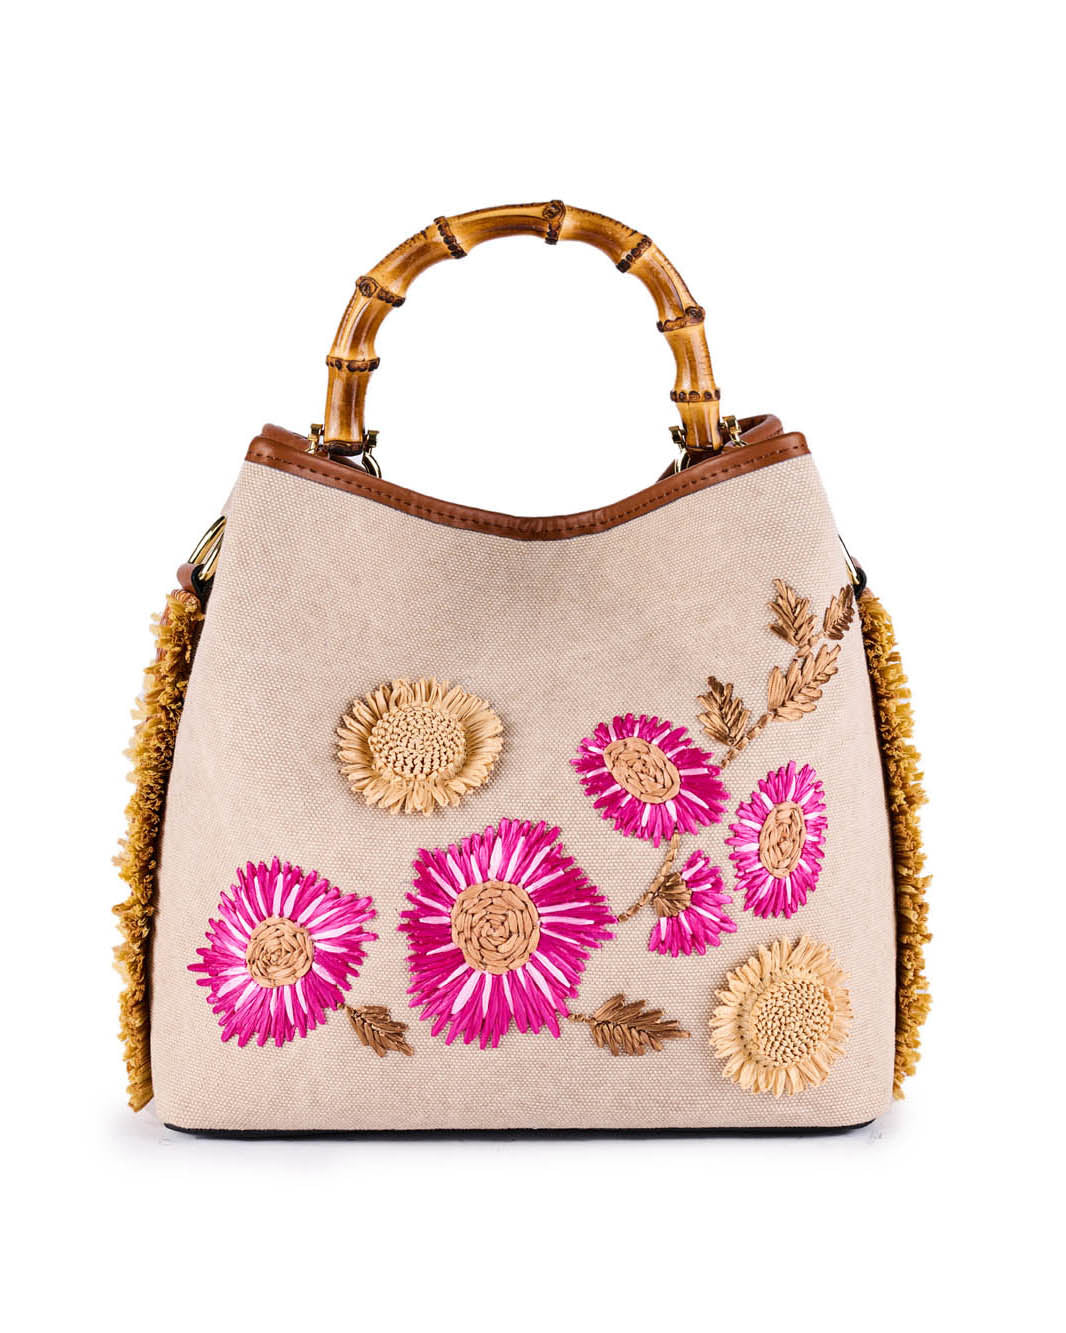 Beige handbag with bamboo handles, featuring vibrant pink and beige floral embroidery